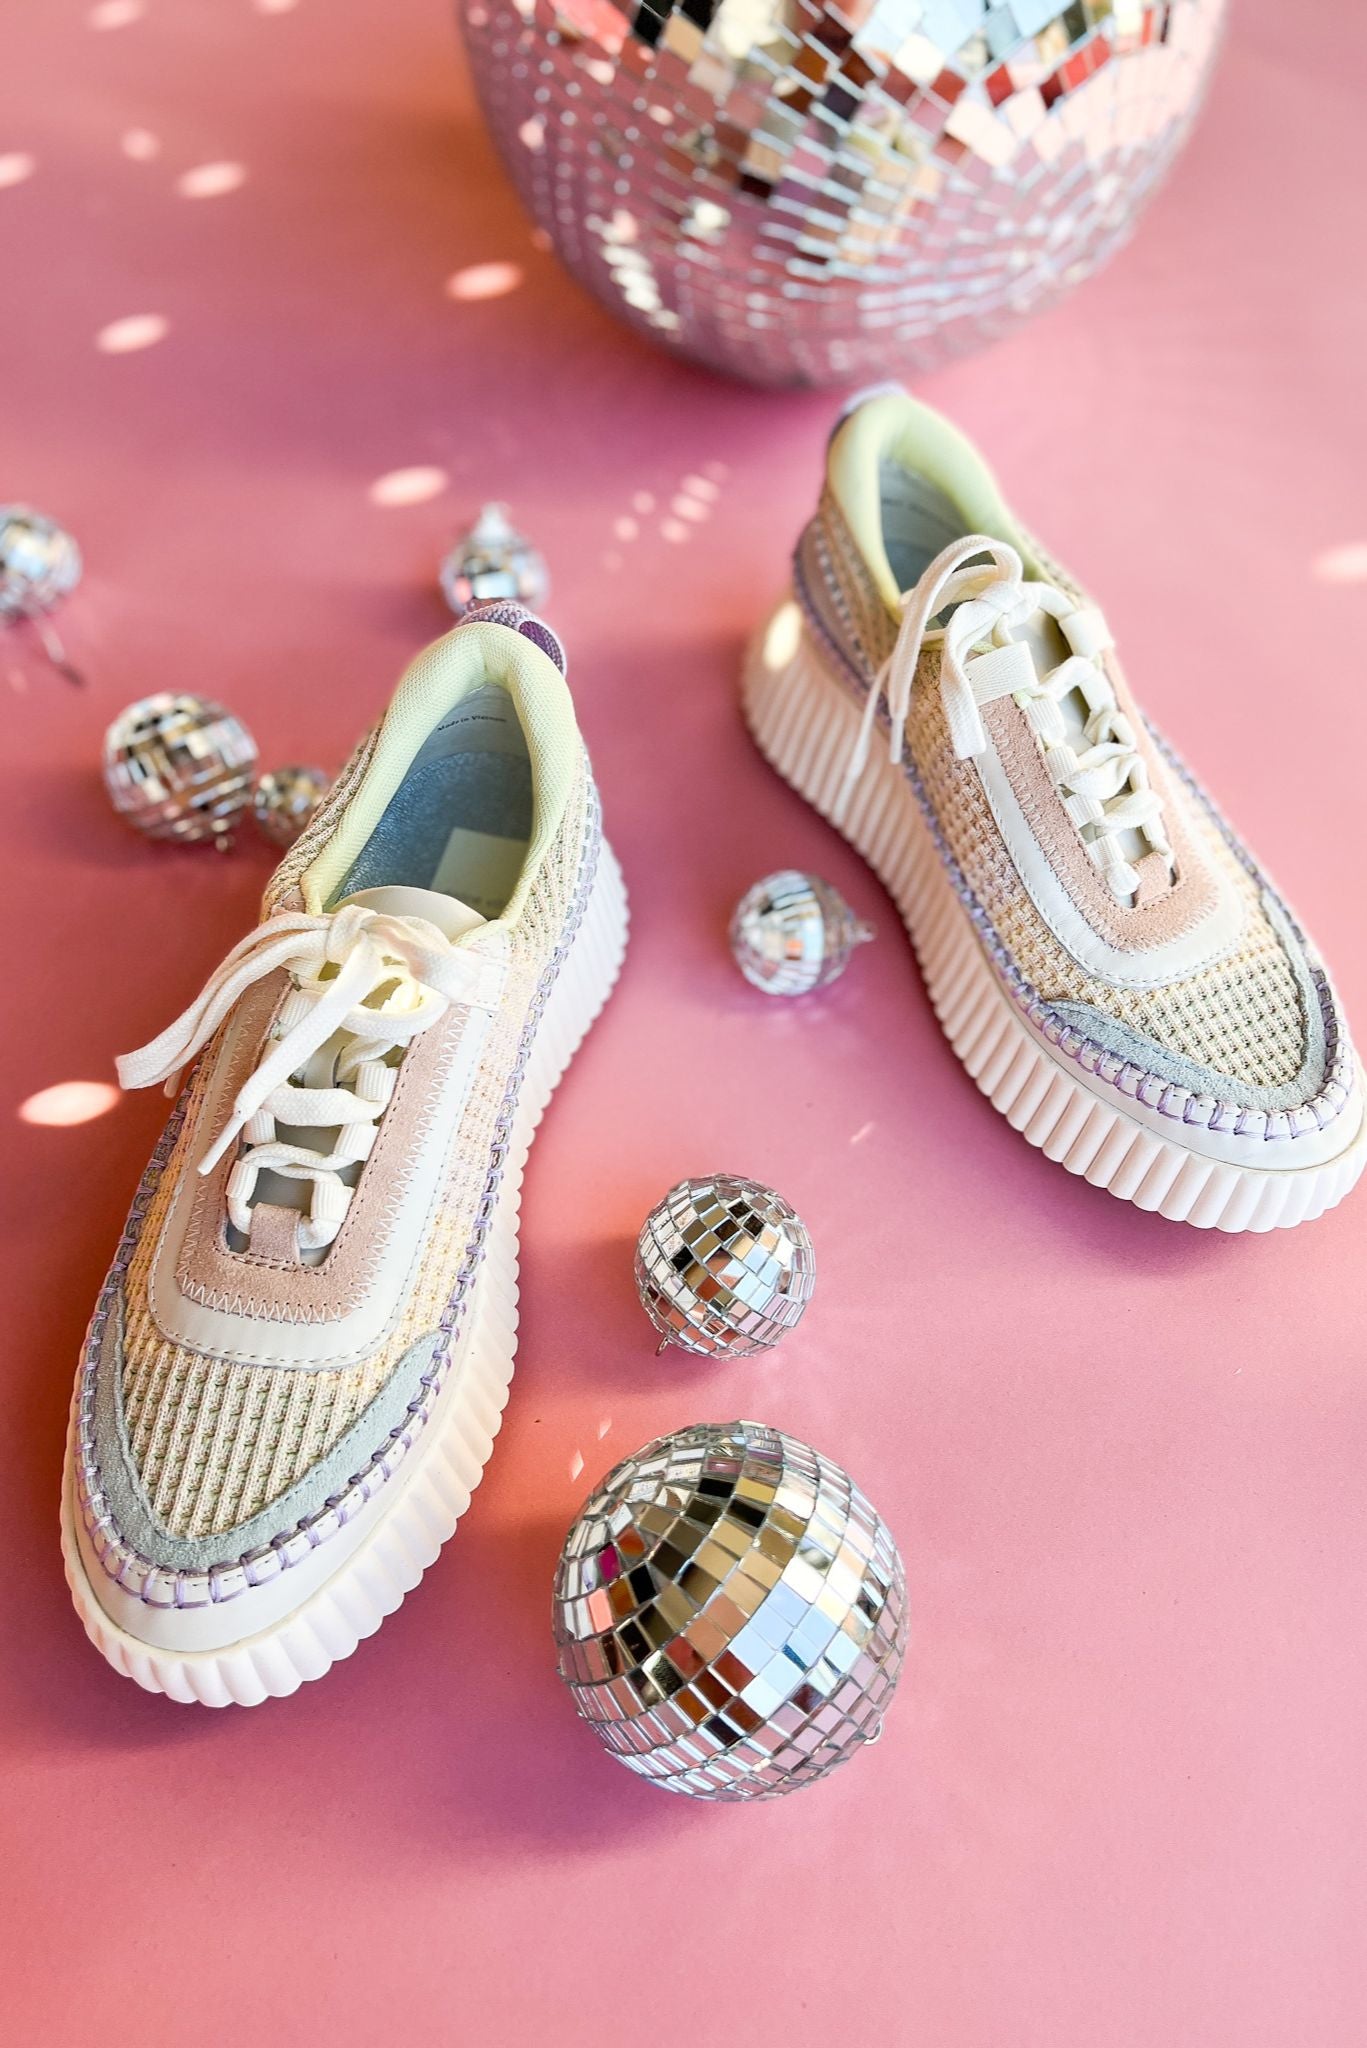 Dolce Vita Pastel Knit Platform Sneakers. Spring chic. mom style. work to weekend. beach perfection. Shop Style Your Senses by Mallory Fitzsimmons.